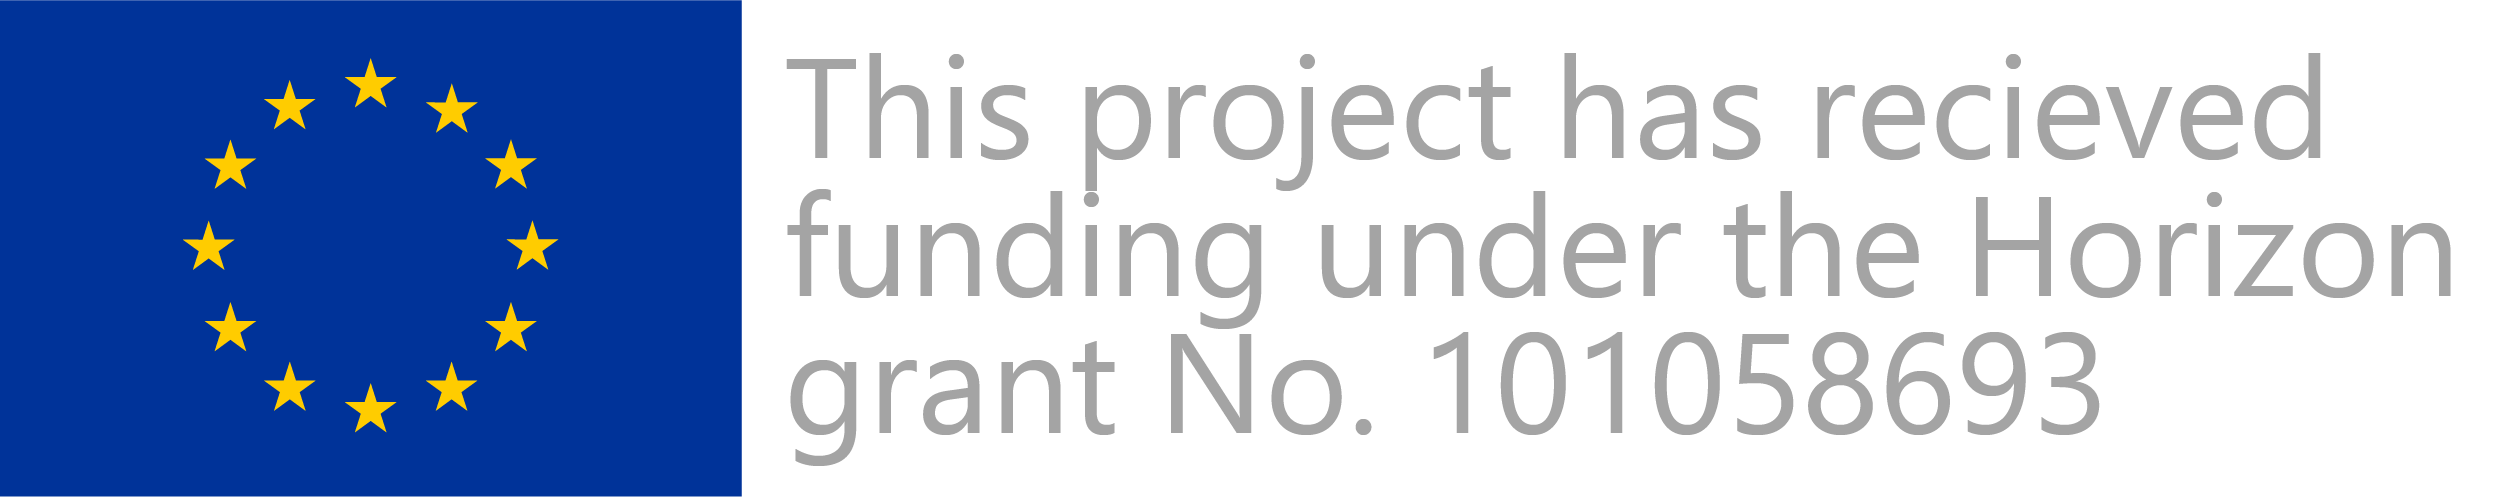 European Union Flag with text on the right that says This project has received funding under the Horizon grant No. 101058693